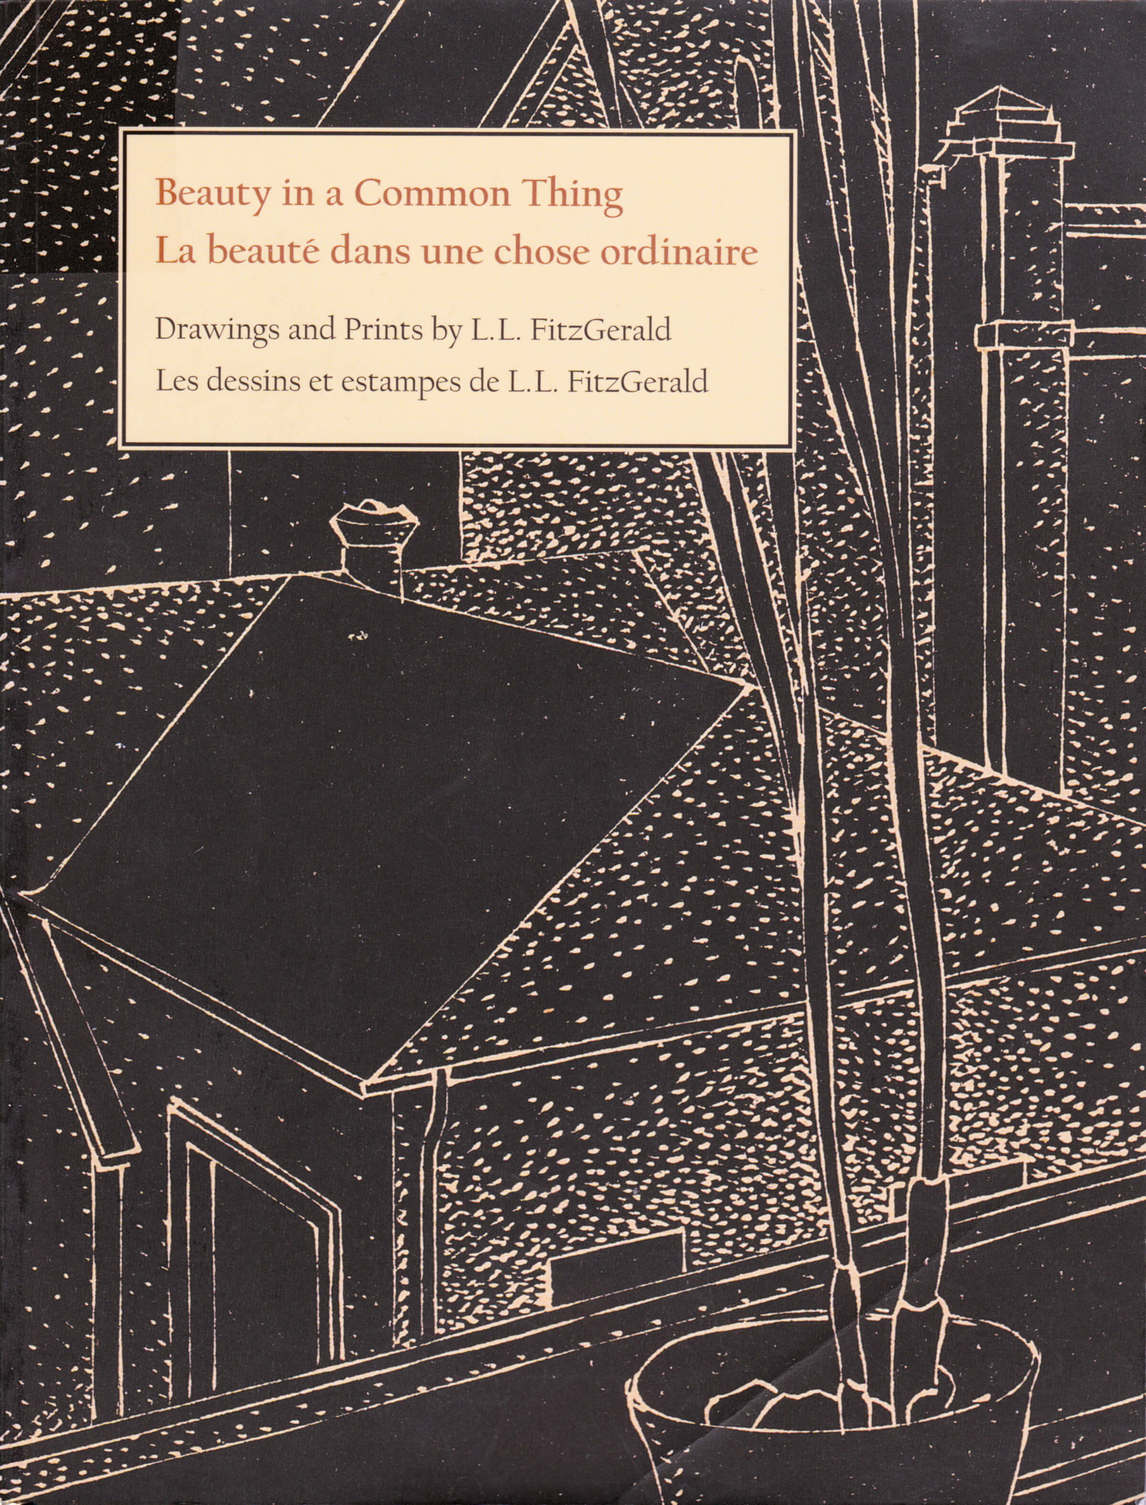 Art Canada Institute, Cover of exhibition catalogue Beauty in a Common Thing: Drawings and Prints by L.L. FitzGerald (Ottawa: National Gallery of Canada, 2004)